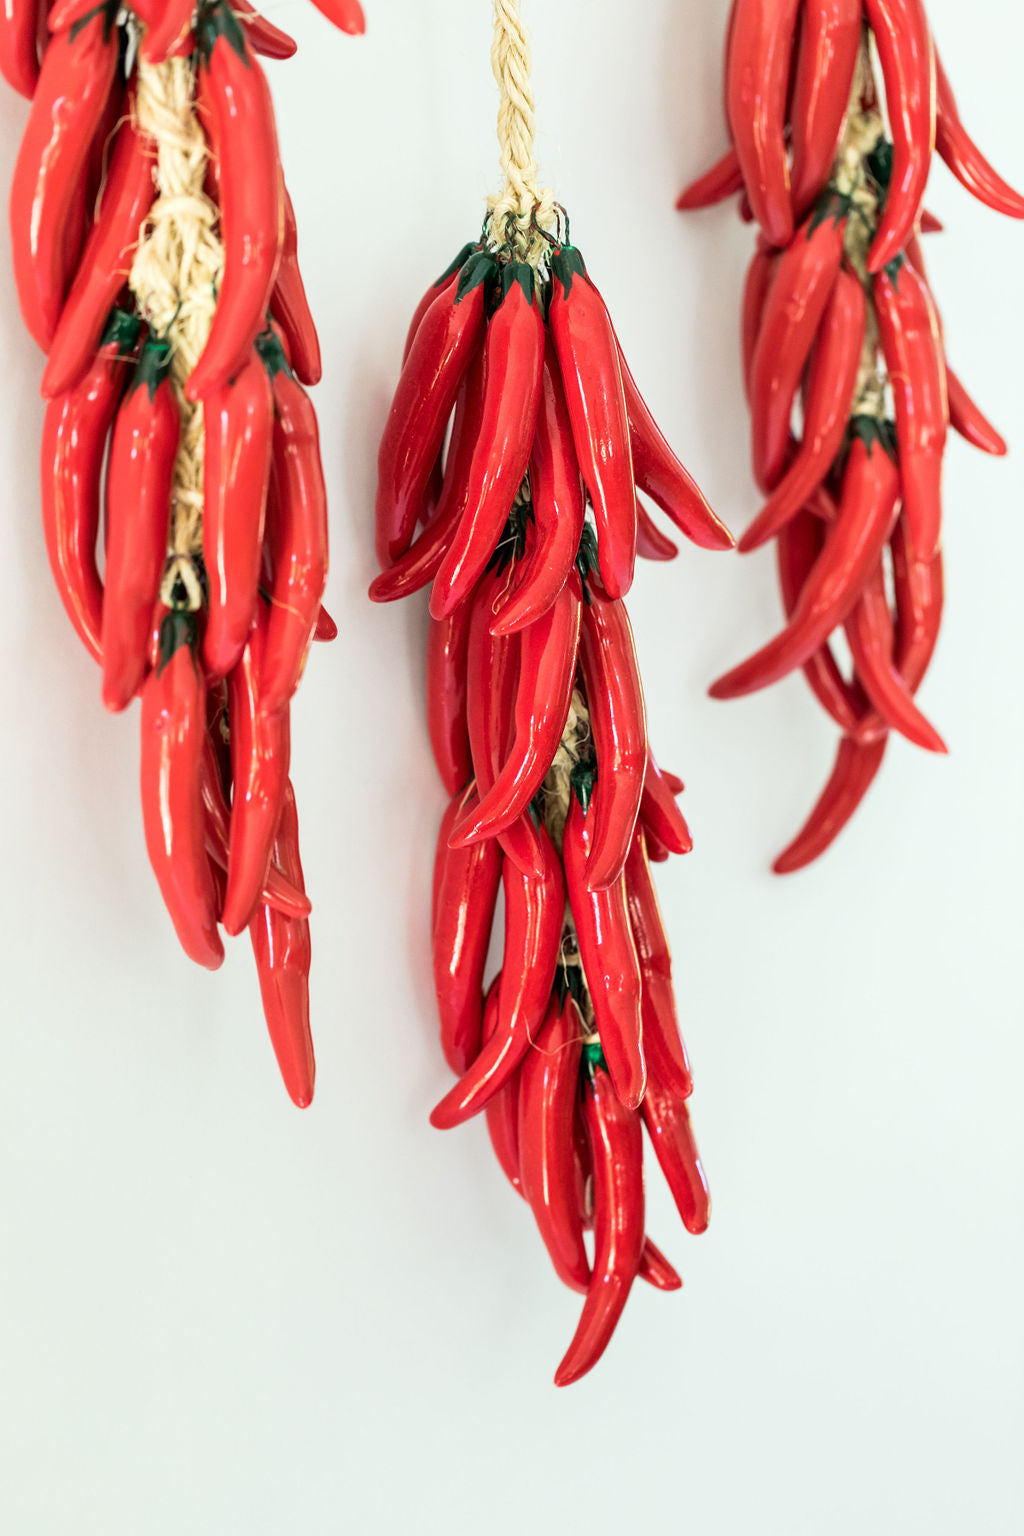 Hanging Red Chillies